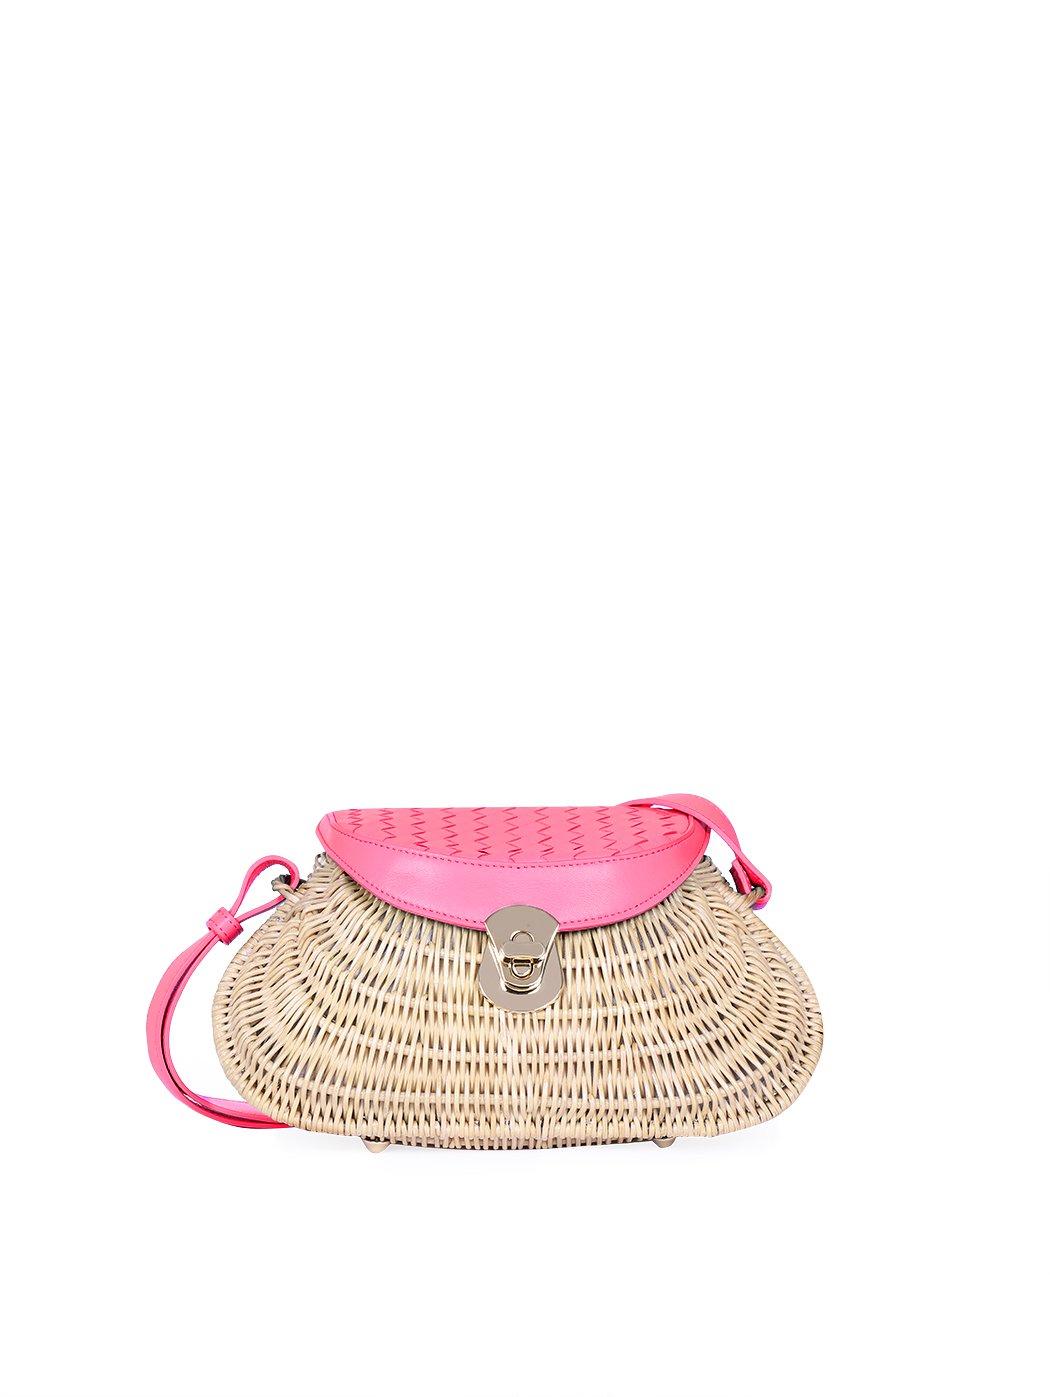 Wicker and Leather Crossbody Shoulder Bag